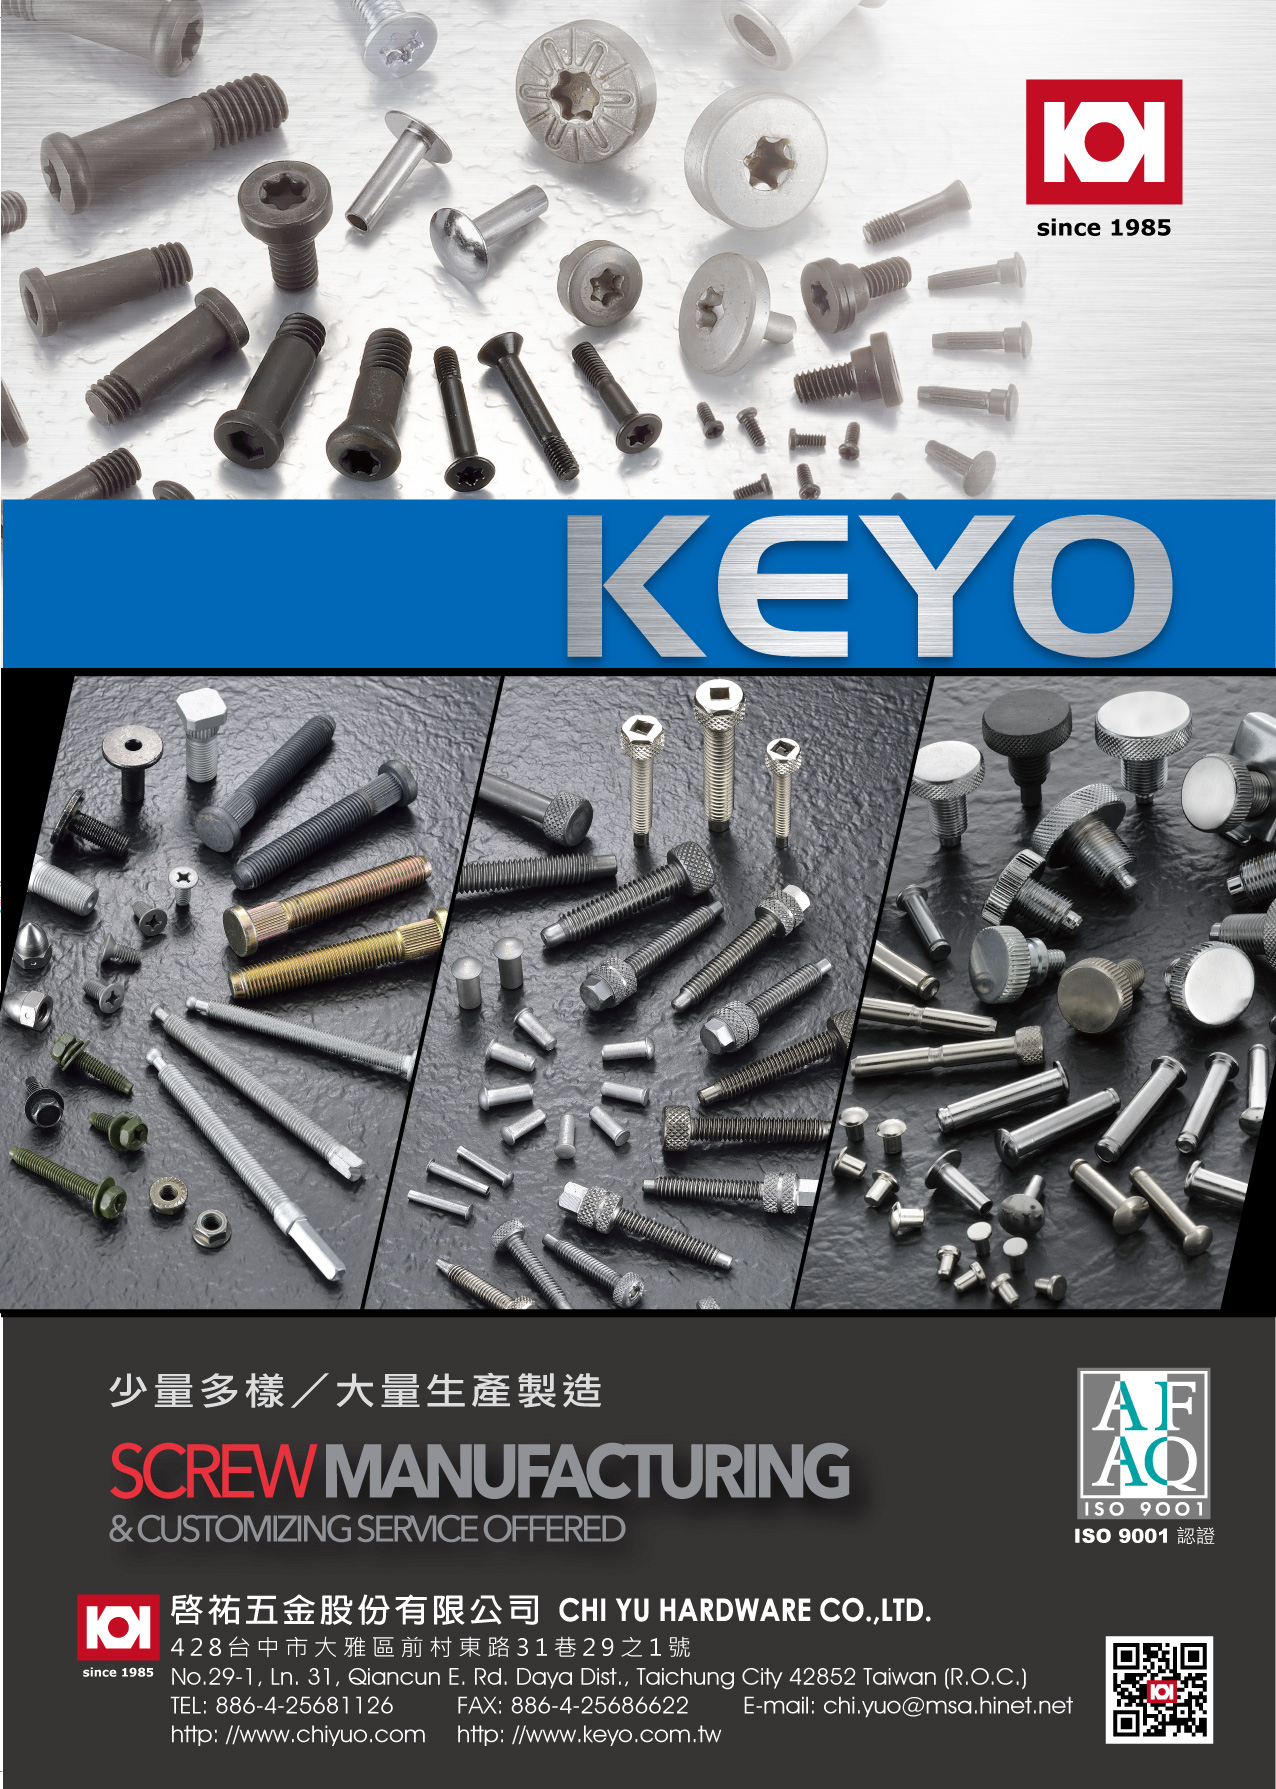 Customized size screw accessories, commonly used screws and bolts